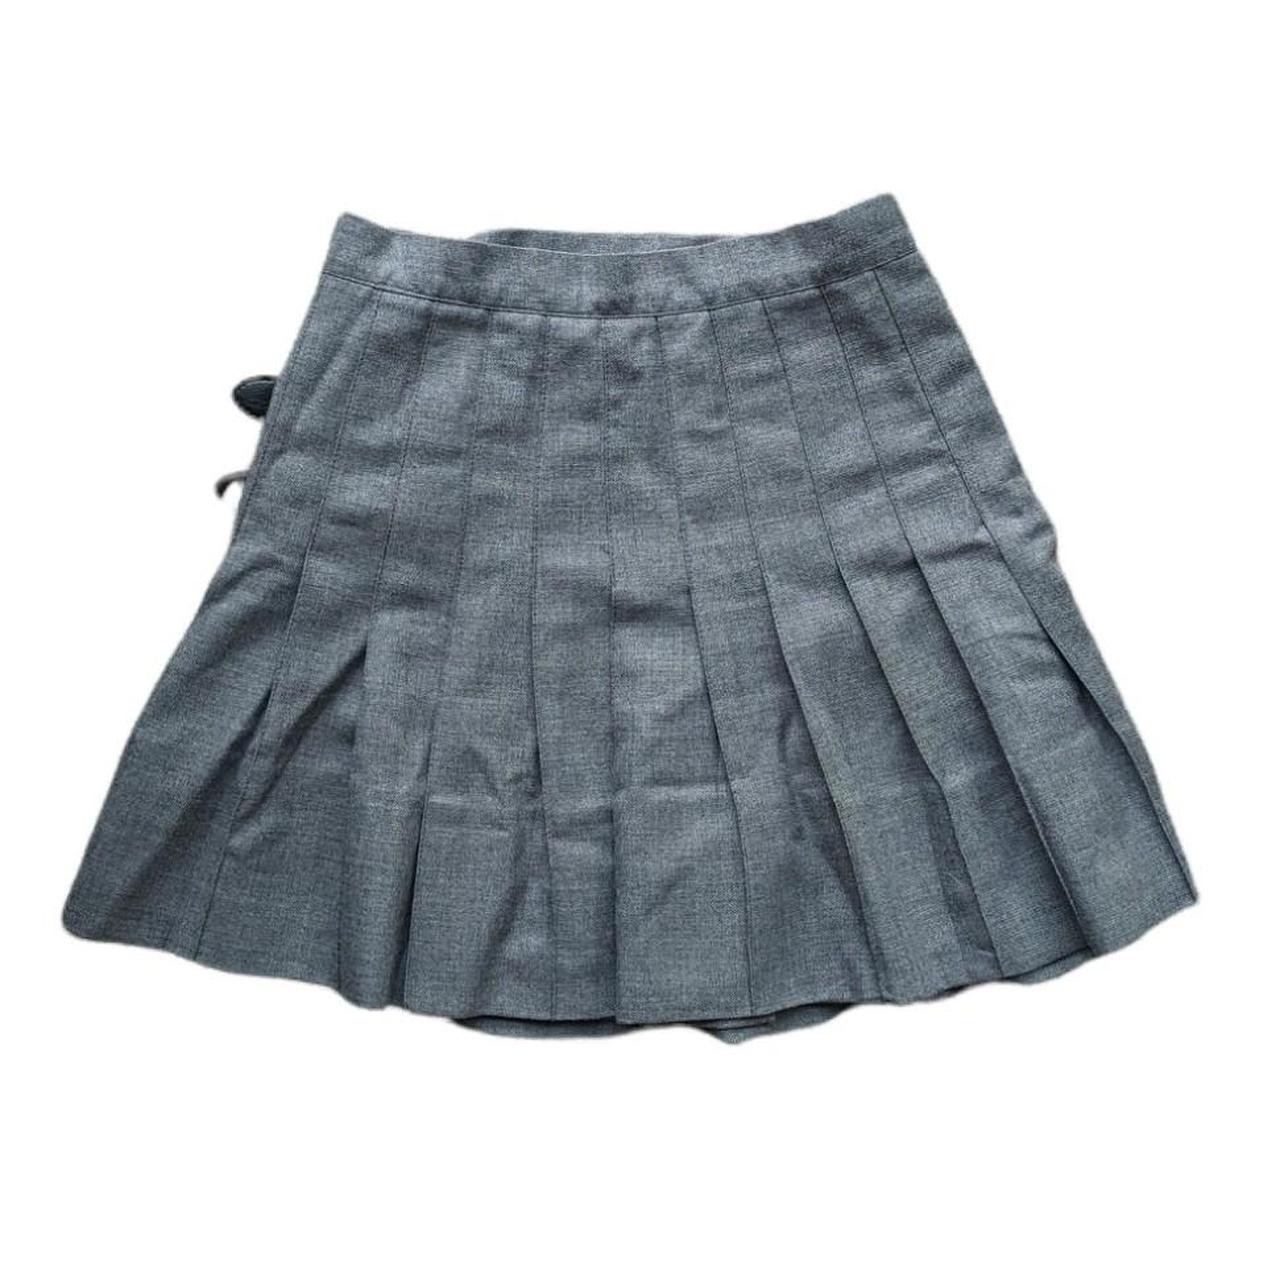 Pleated mini skirt with hip buckles. Featuring... - Depop